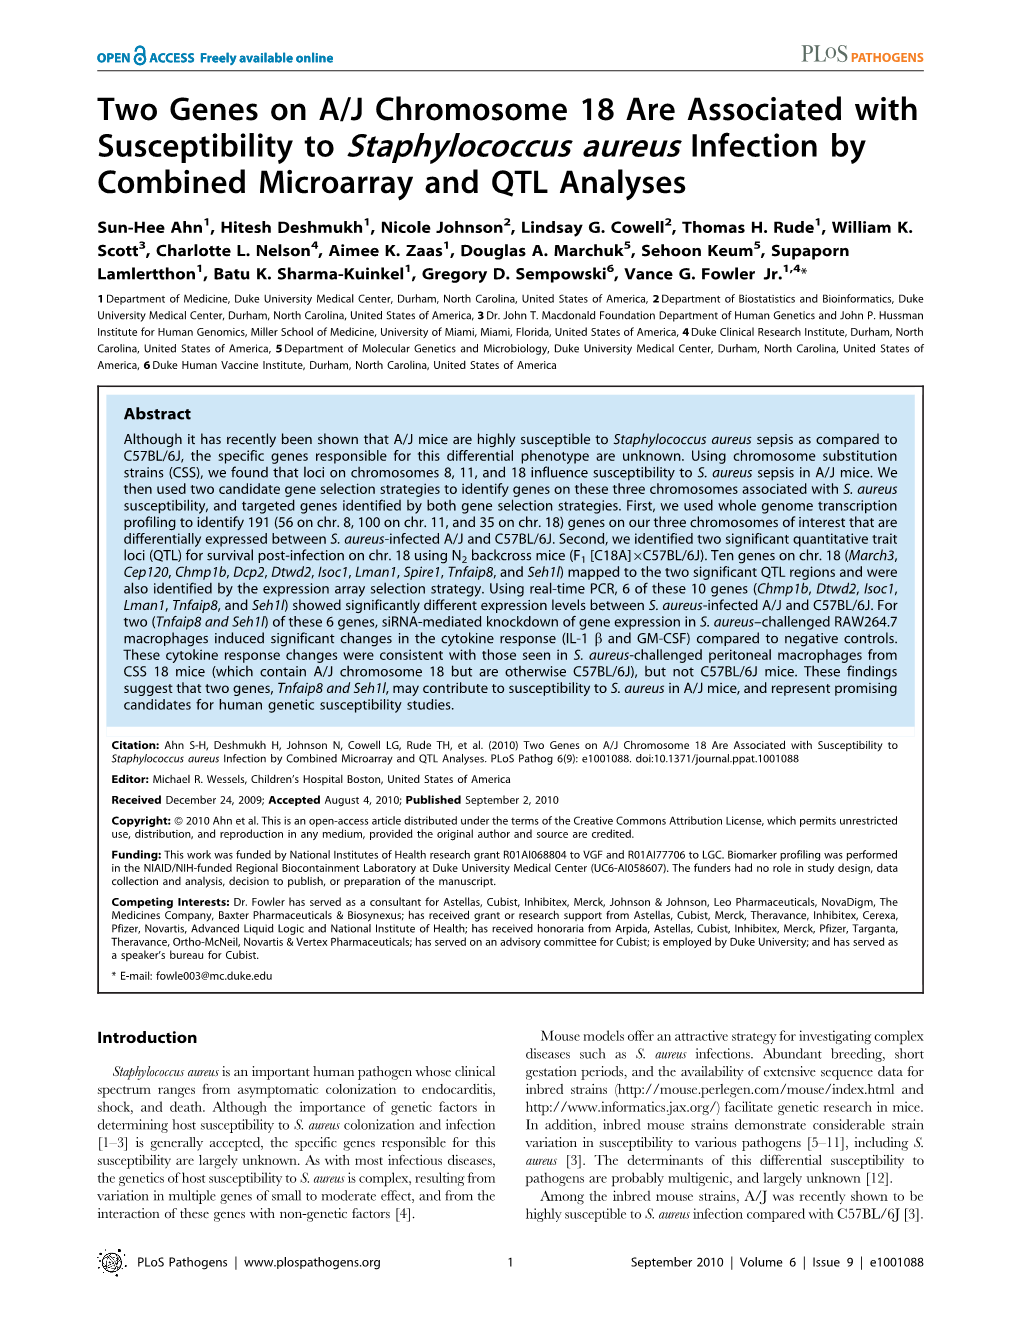 Susceptibility to Staphylococcus Aureus Infection by Combined Microarray and QTL Analyses